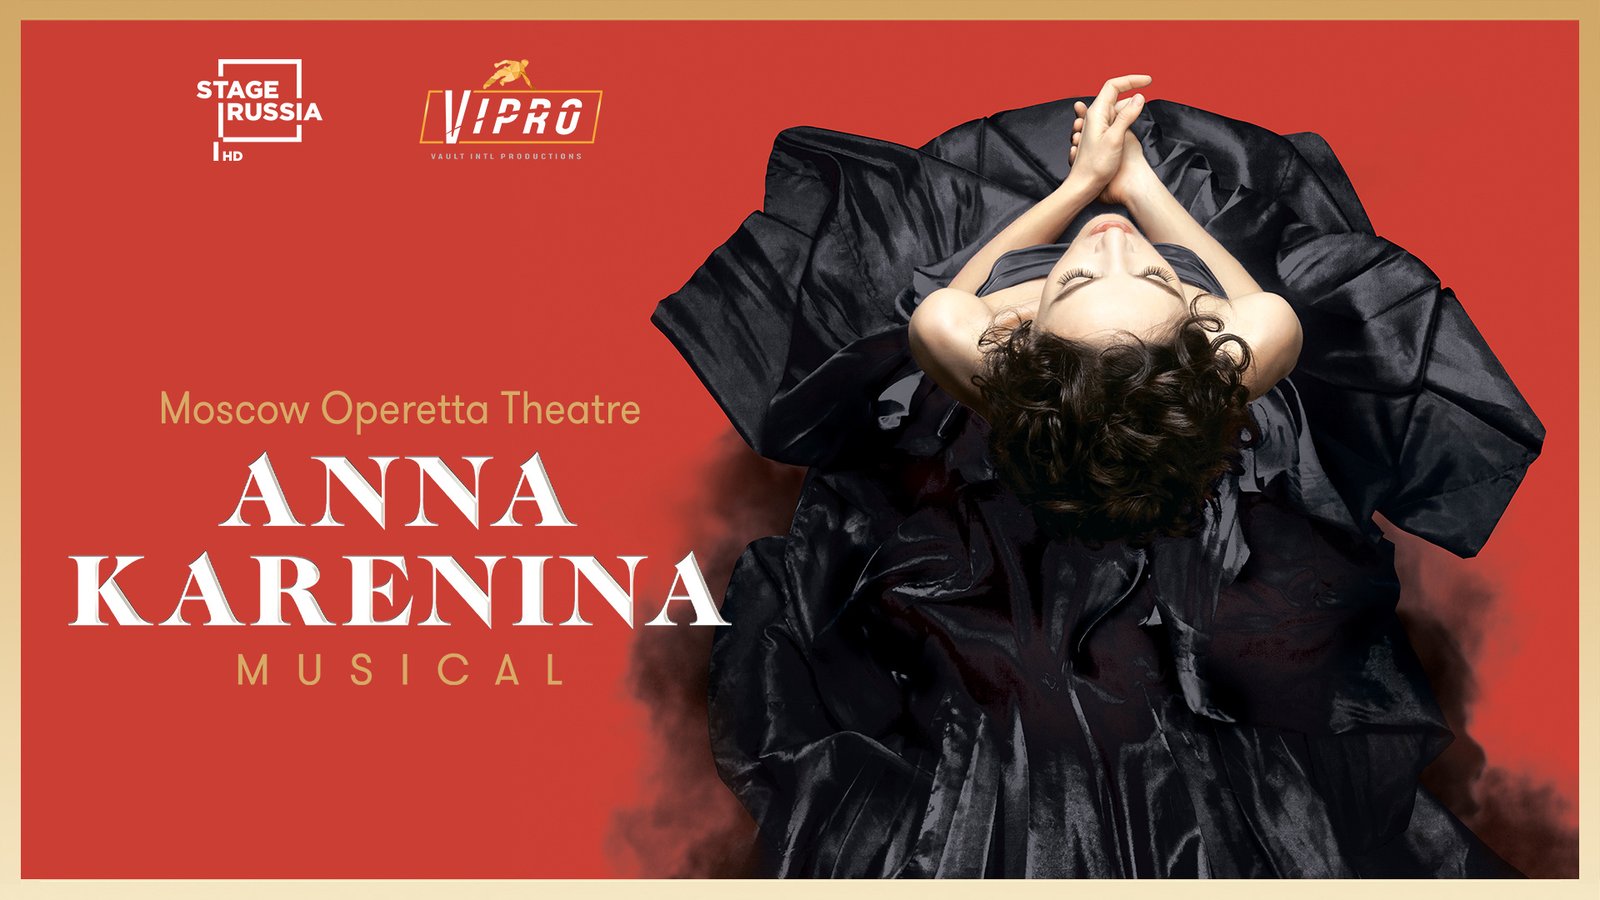 Moscow Operetta's Anna Karenina Musical - From Moscow Operetta Theatre